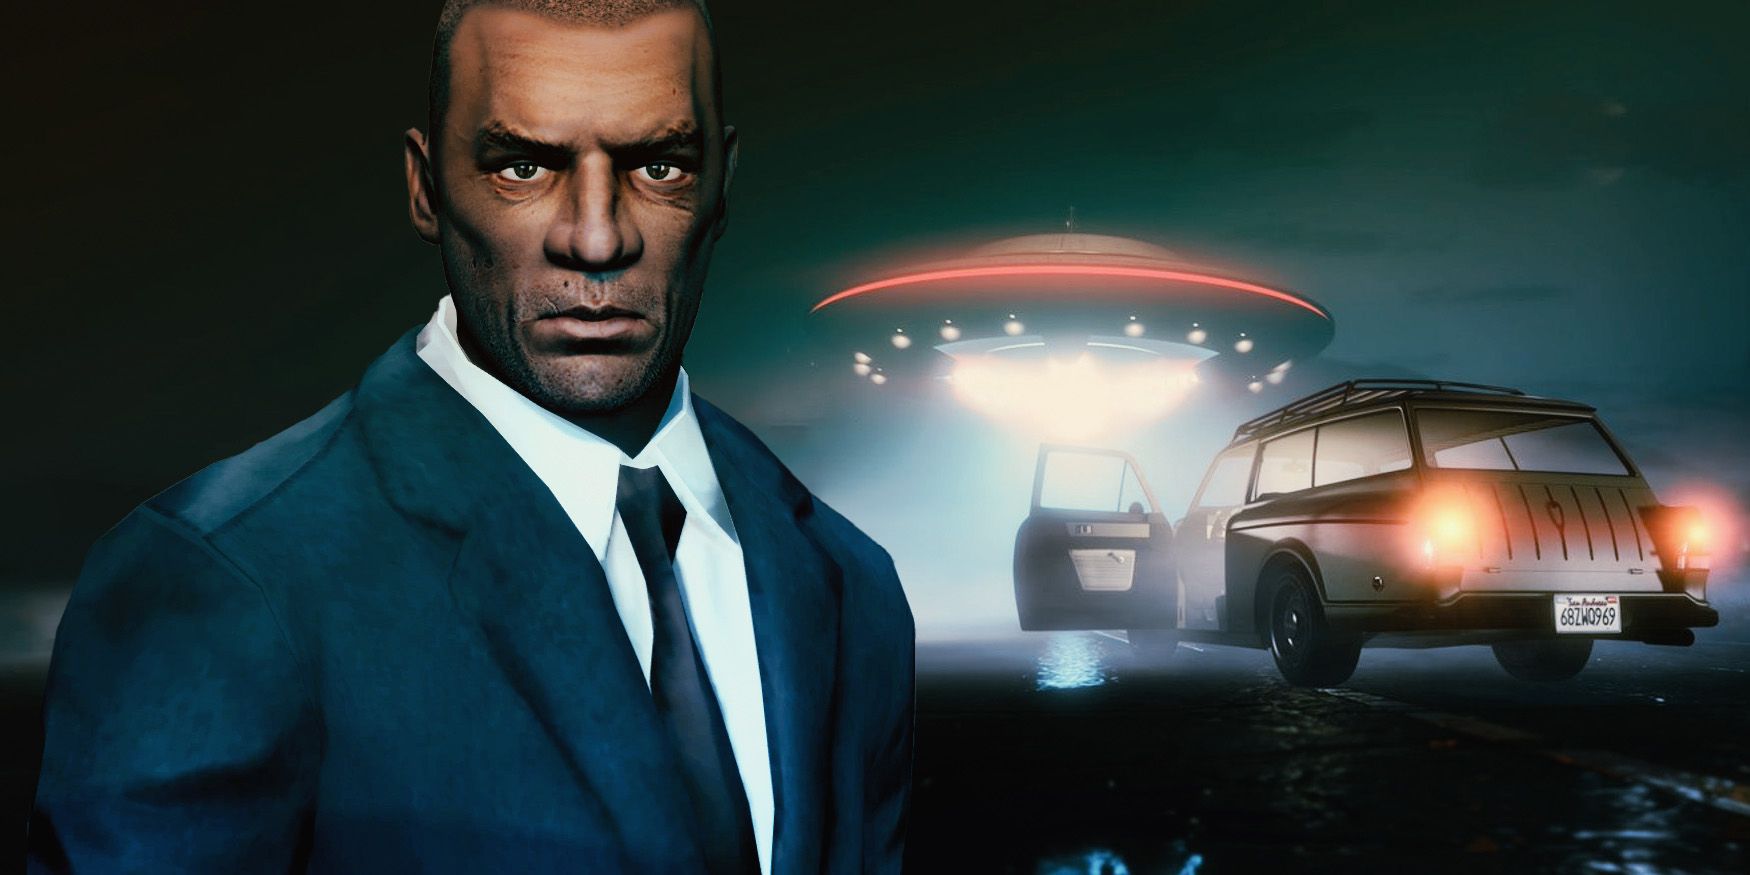 5 Niko Bellic references hidden in GTA 5 that players might have missed